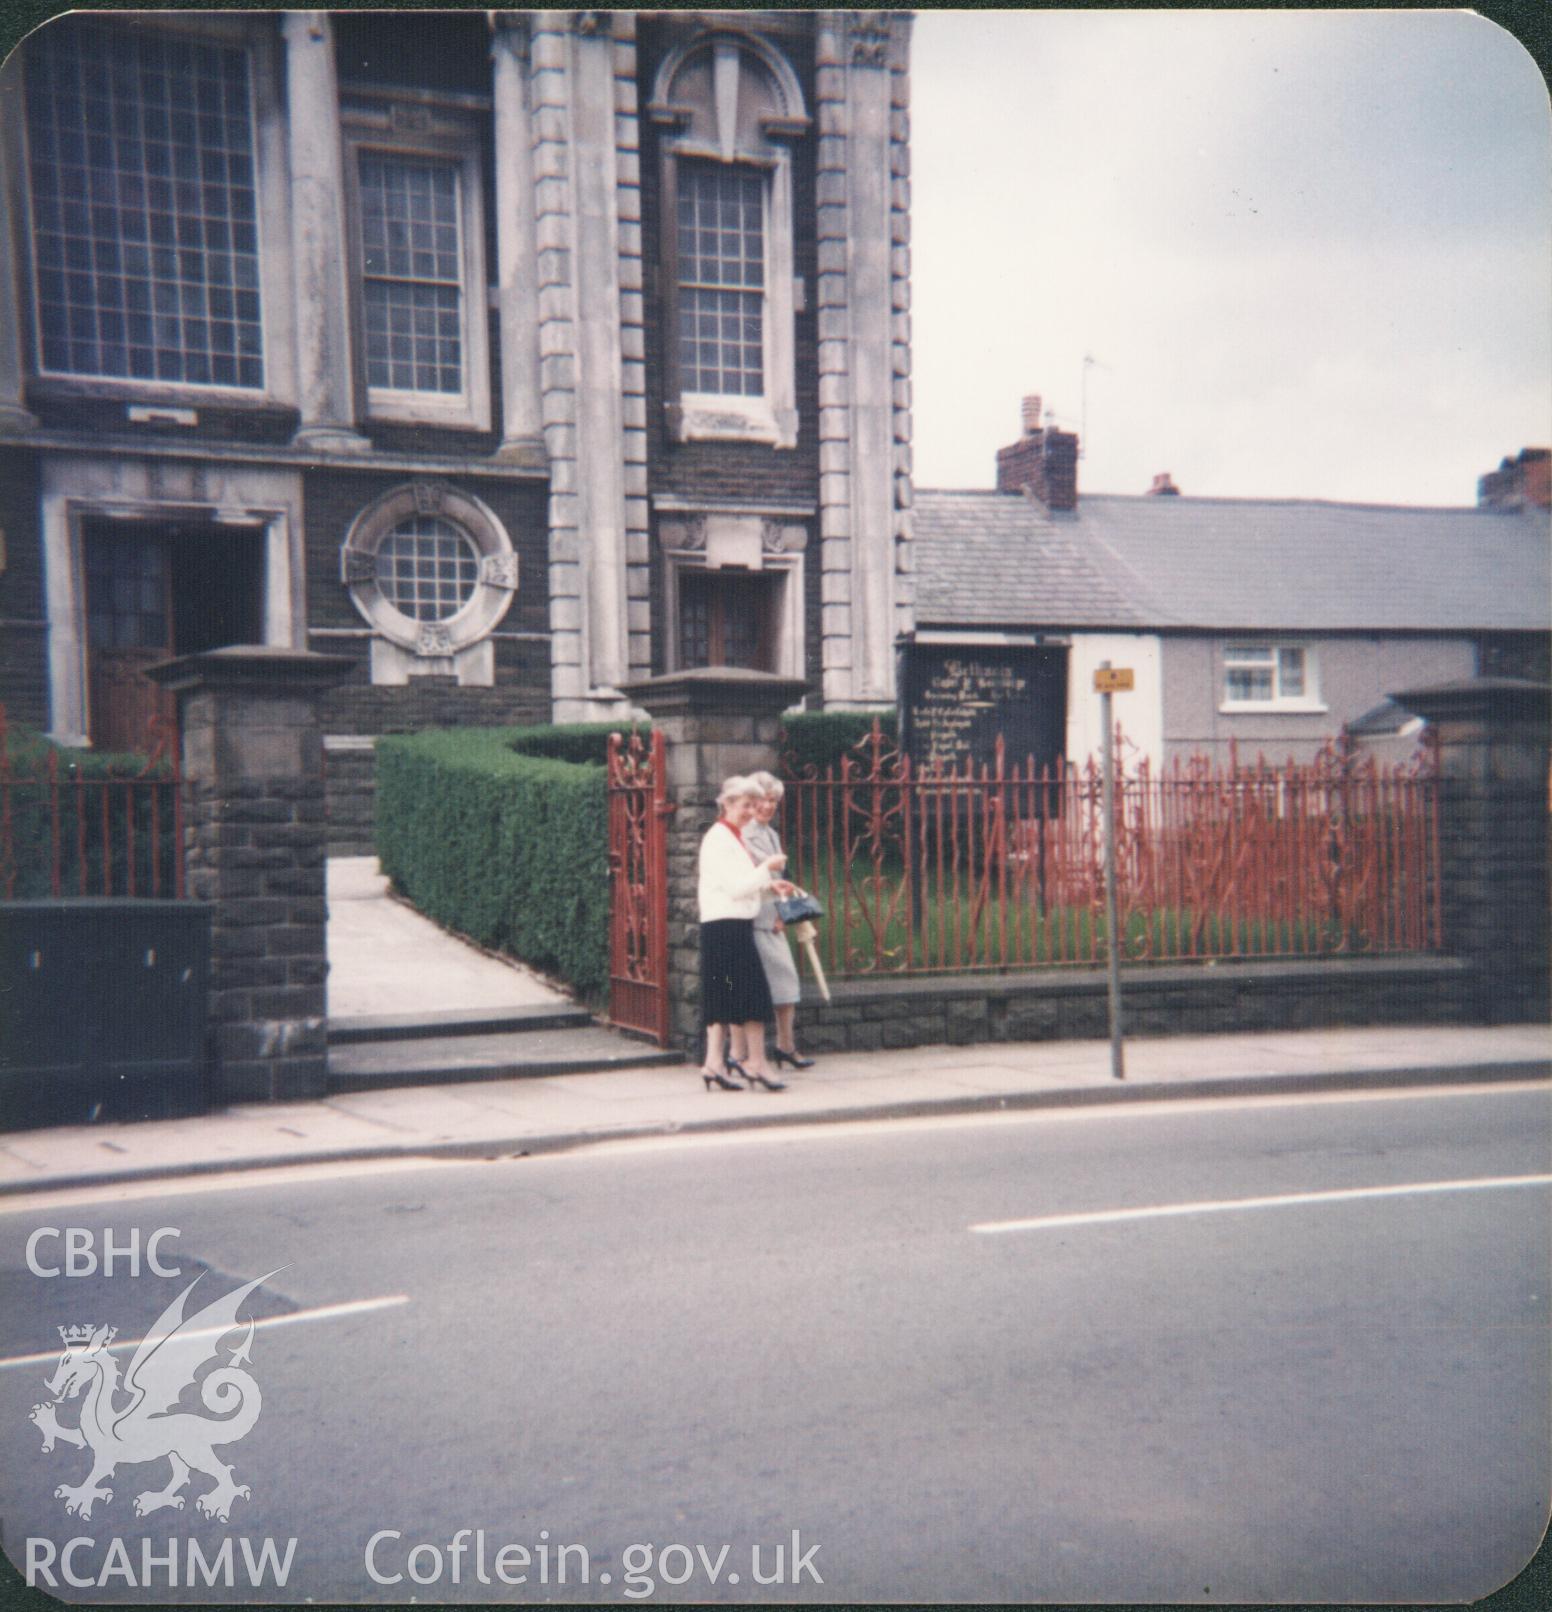 Colour photograph of soprano Cecilia Burnet and organist Ceinwen Bown outside the chapel at Whitsun, 1985. Donated to the RCAHMW by Cyril Philips as part of the Digital Dissent Project.